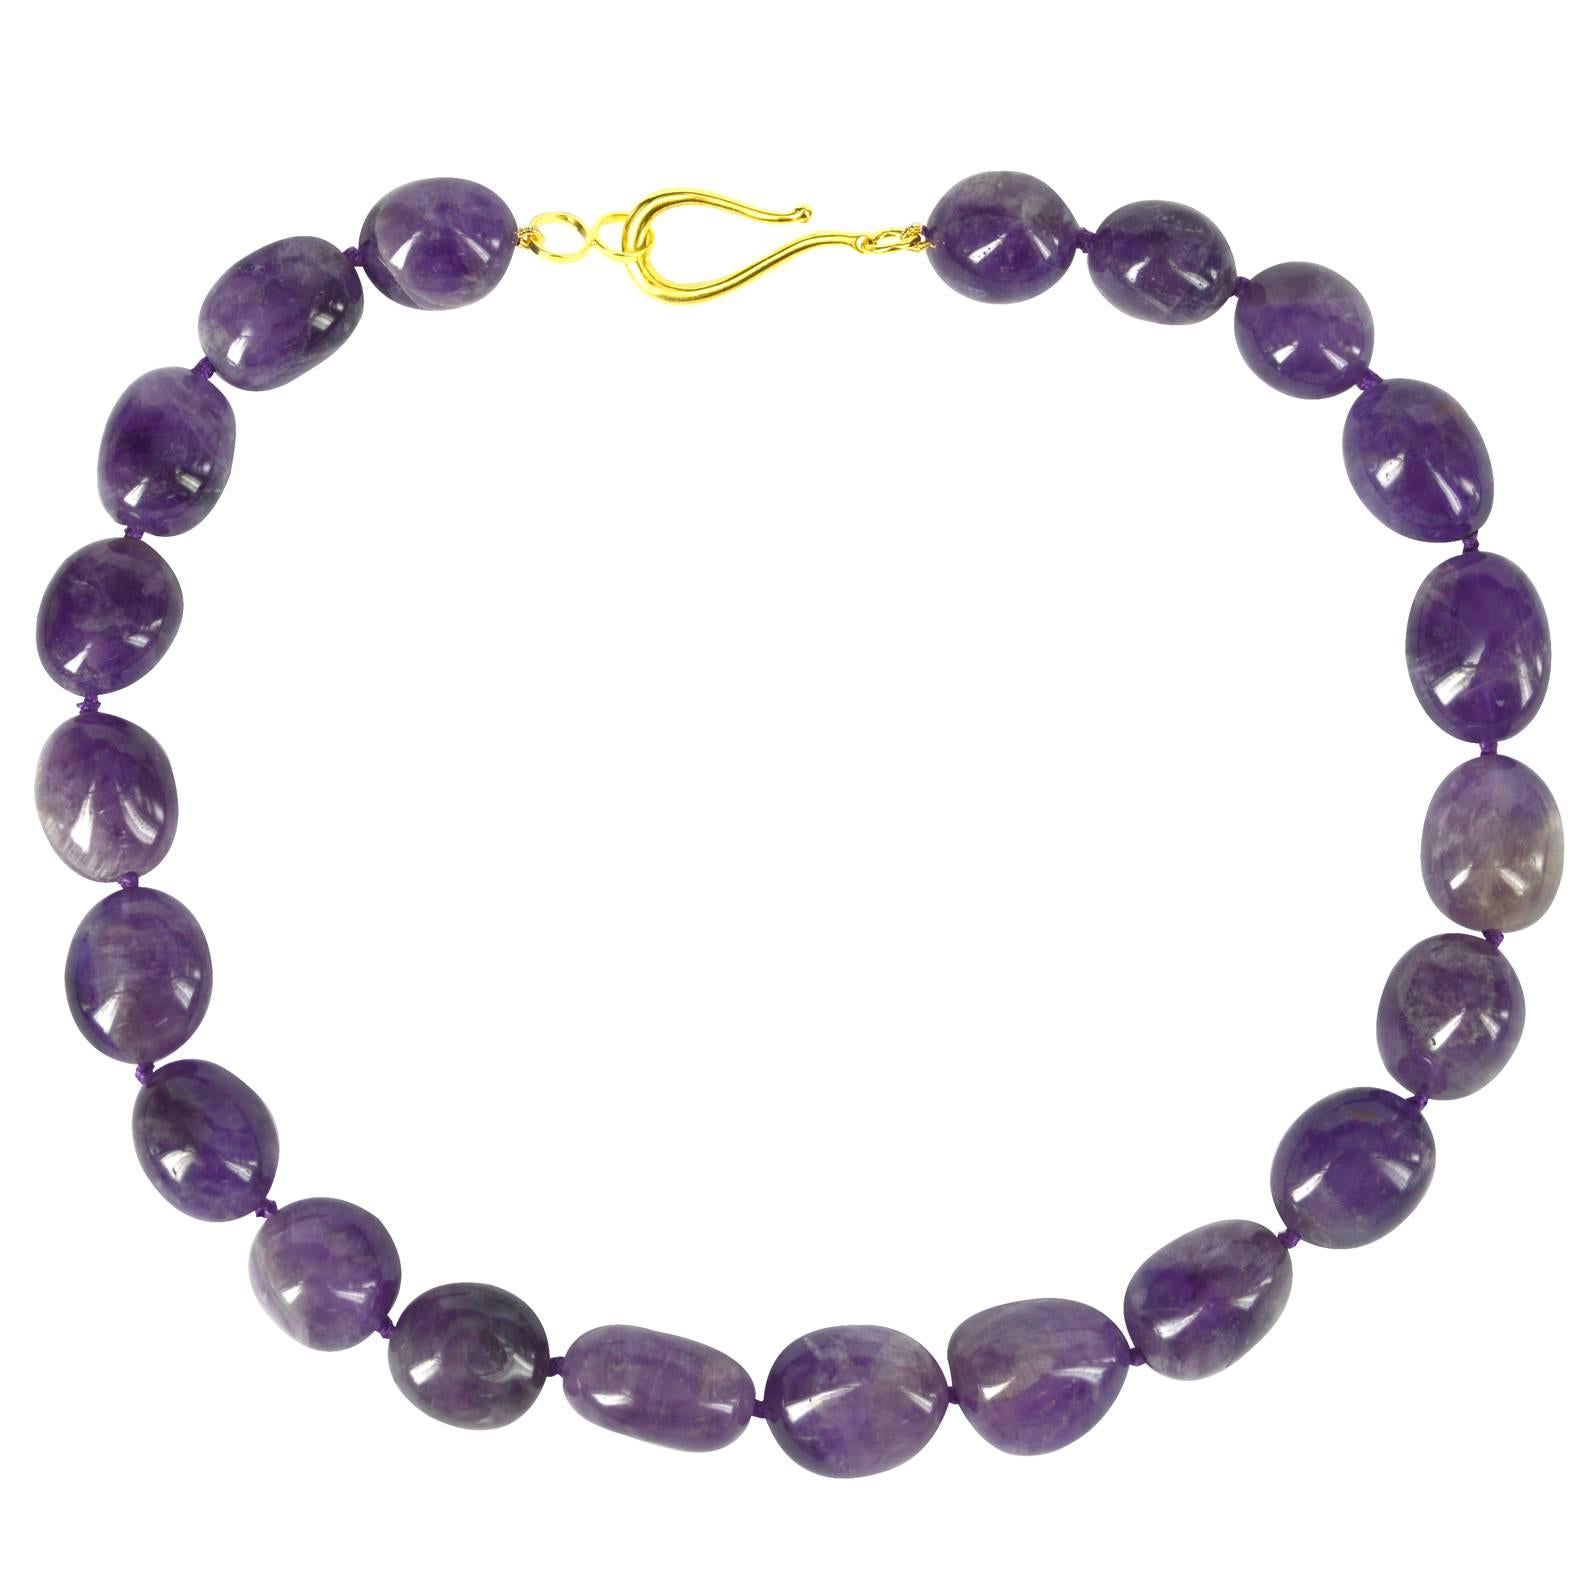 Amethyst Polished Nugget with a 29mm  Gold Plate Sterling Silver hook Clasp, hand knotted for strength and durability.

Finished necklace measures 46.5cm.

Custom modification available on request
Custom modification available on request
Hand